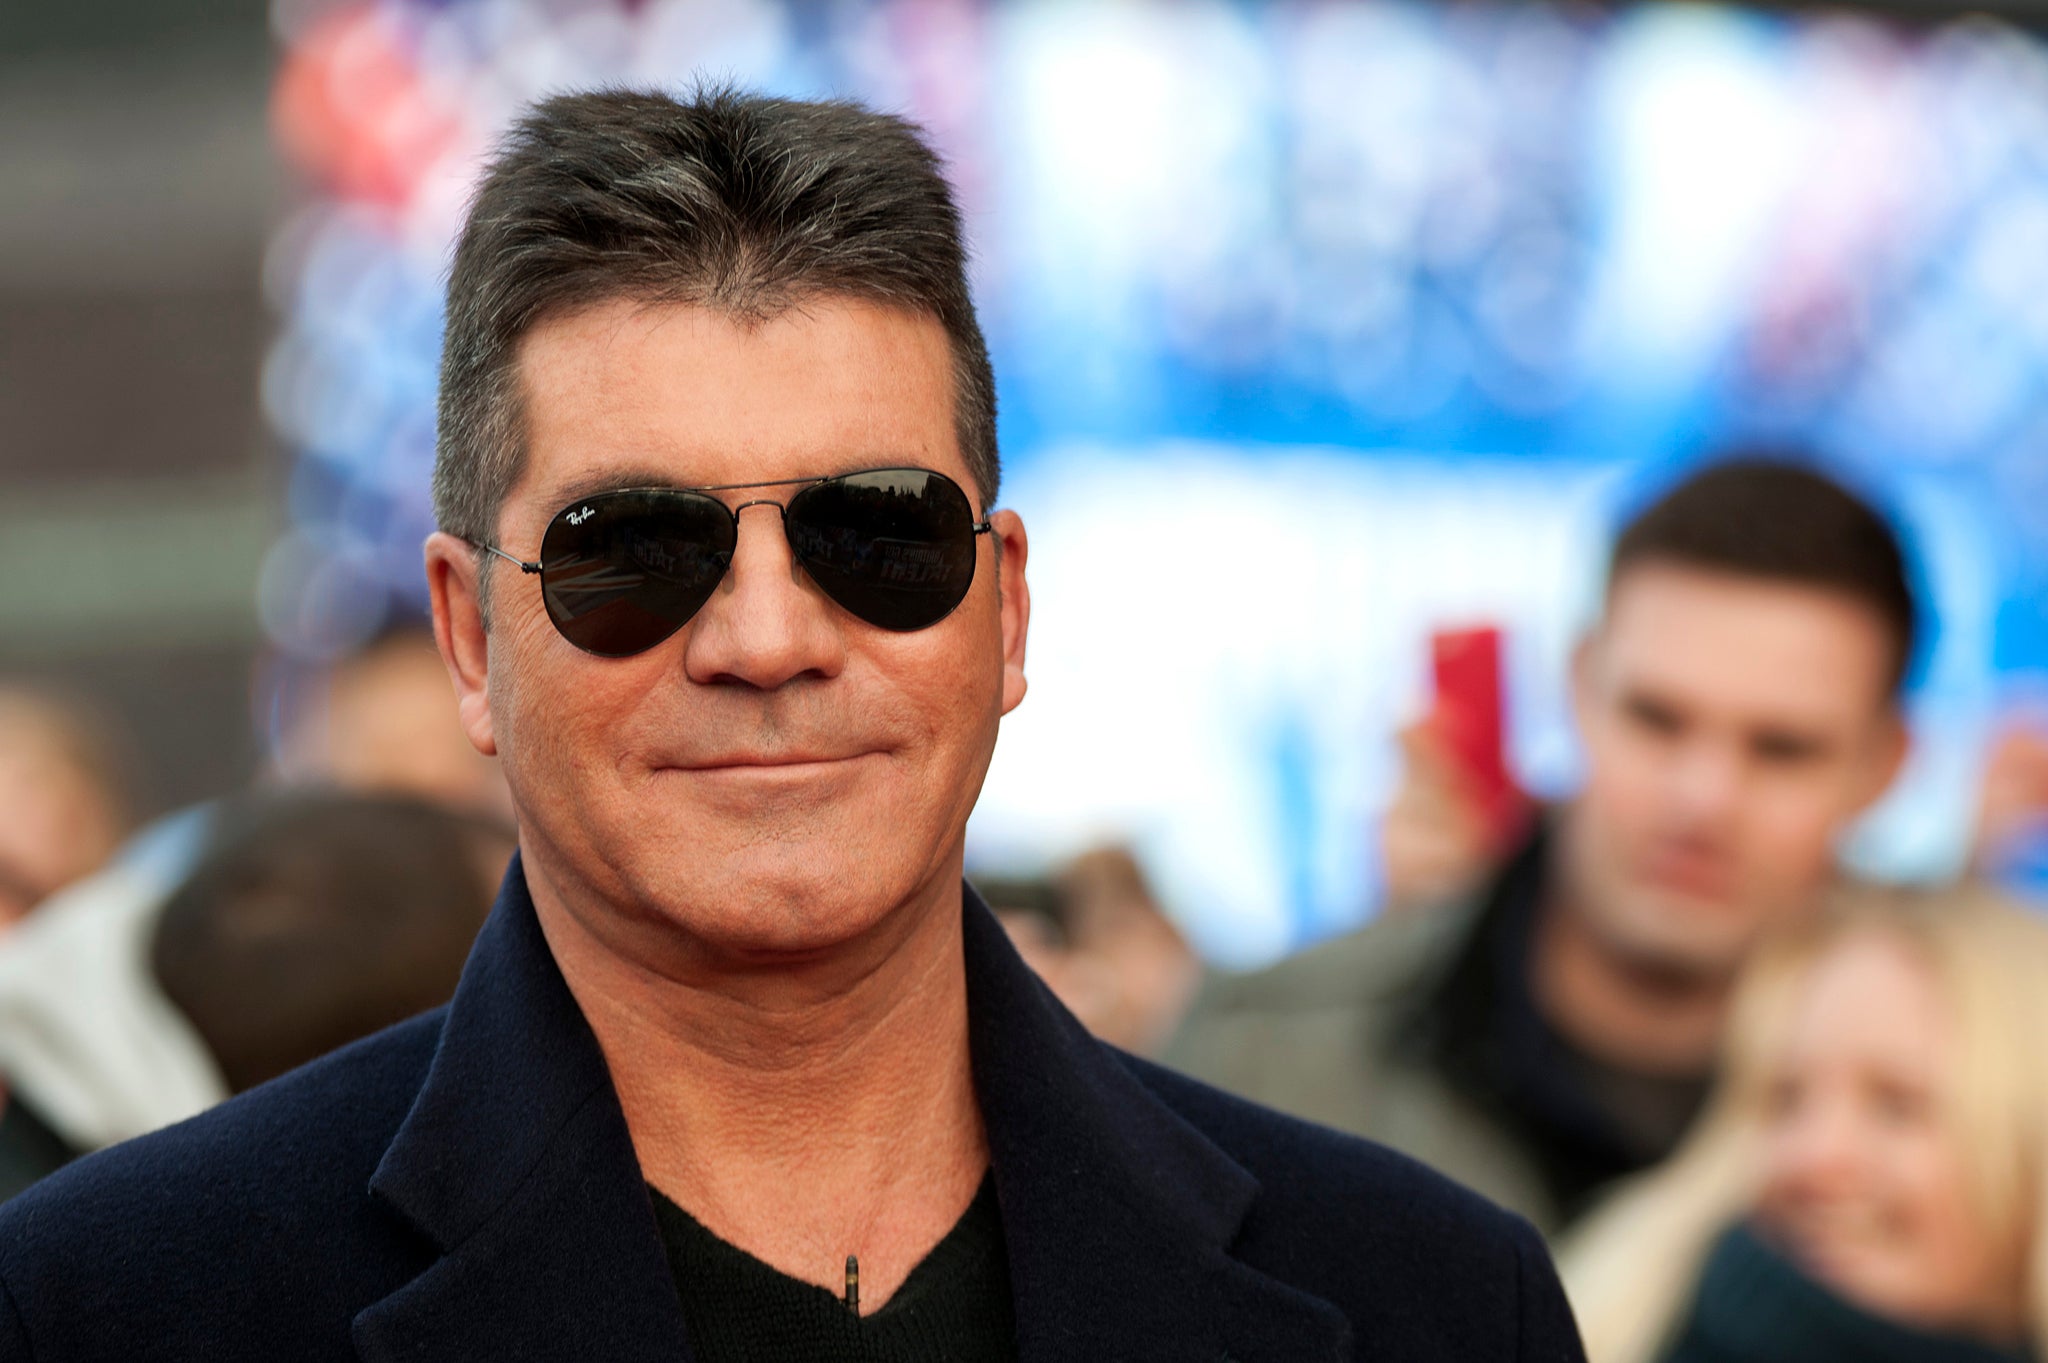 Look who's back: Simon Cowell will sit on the UK's X Factor judging panel this year